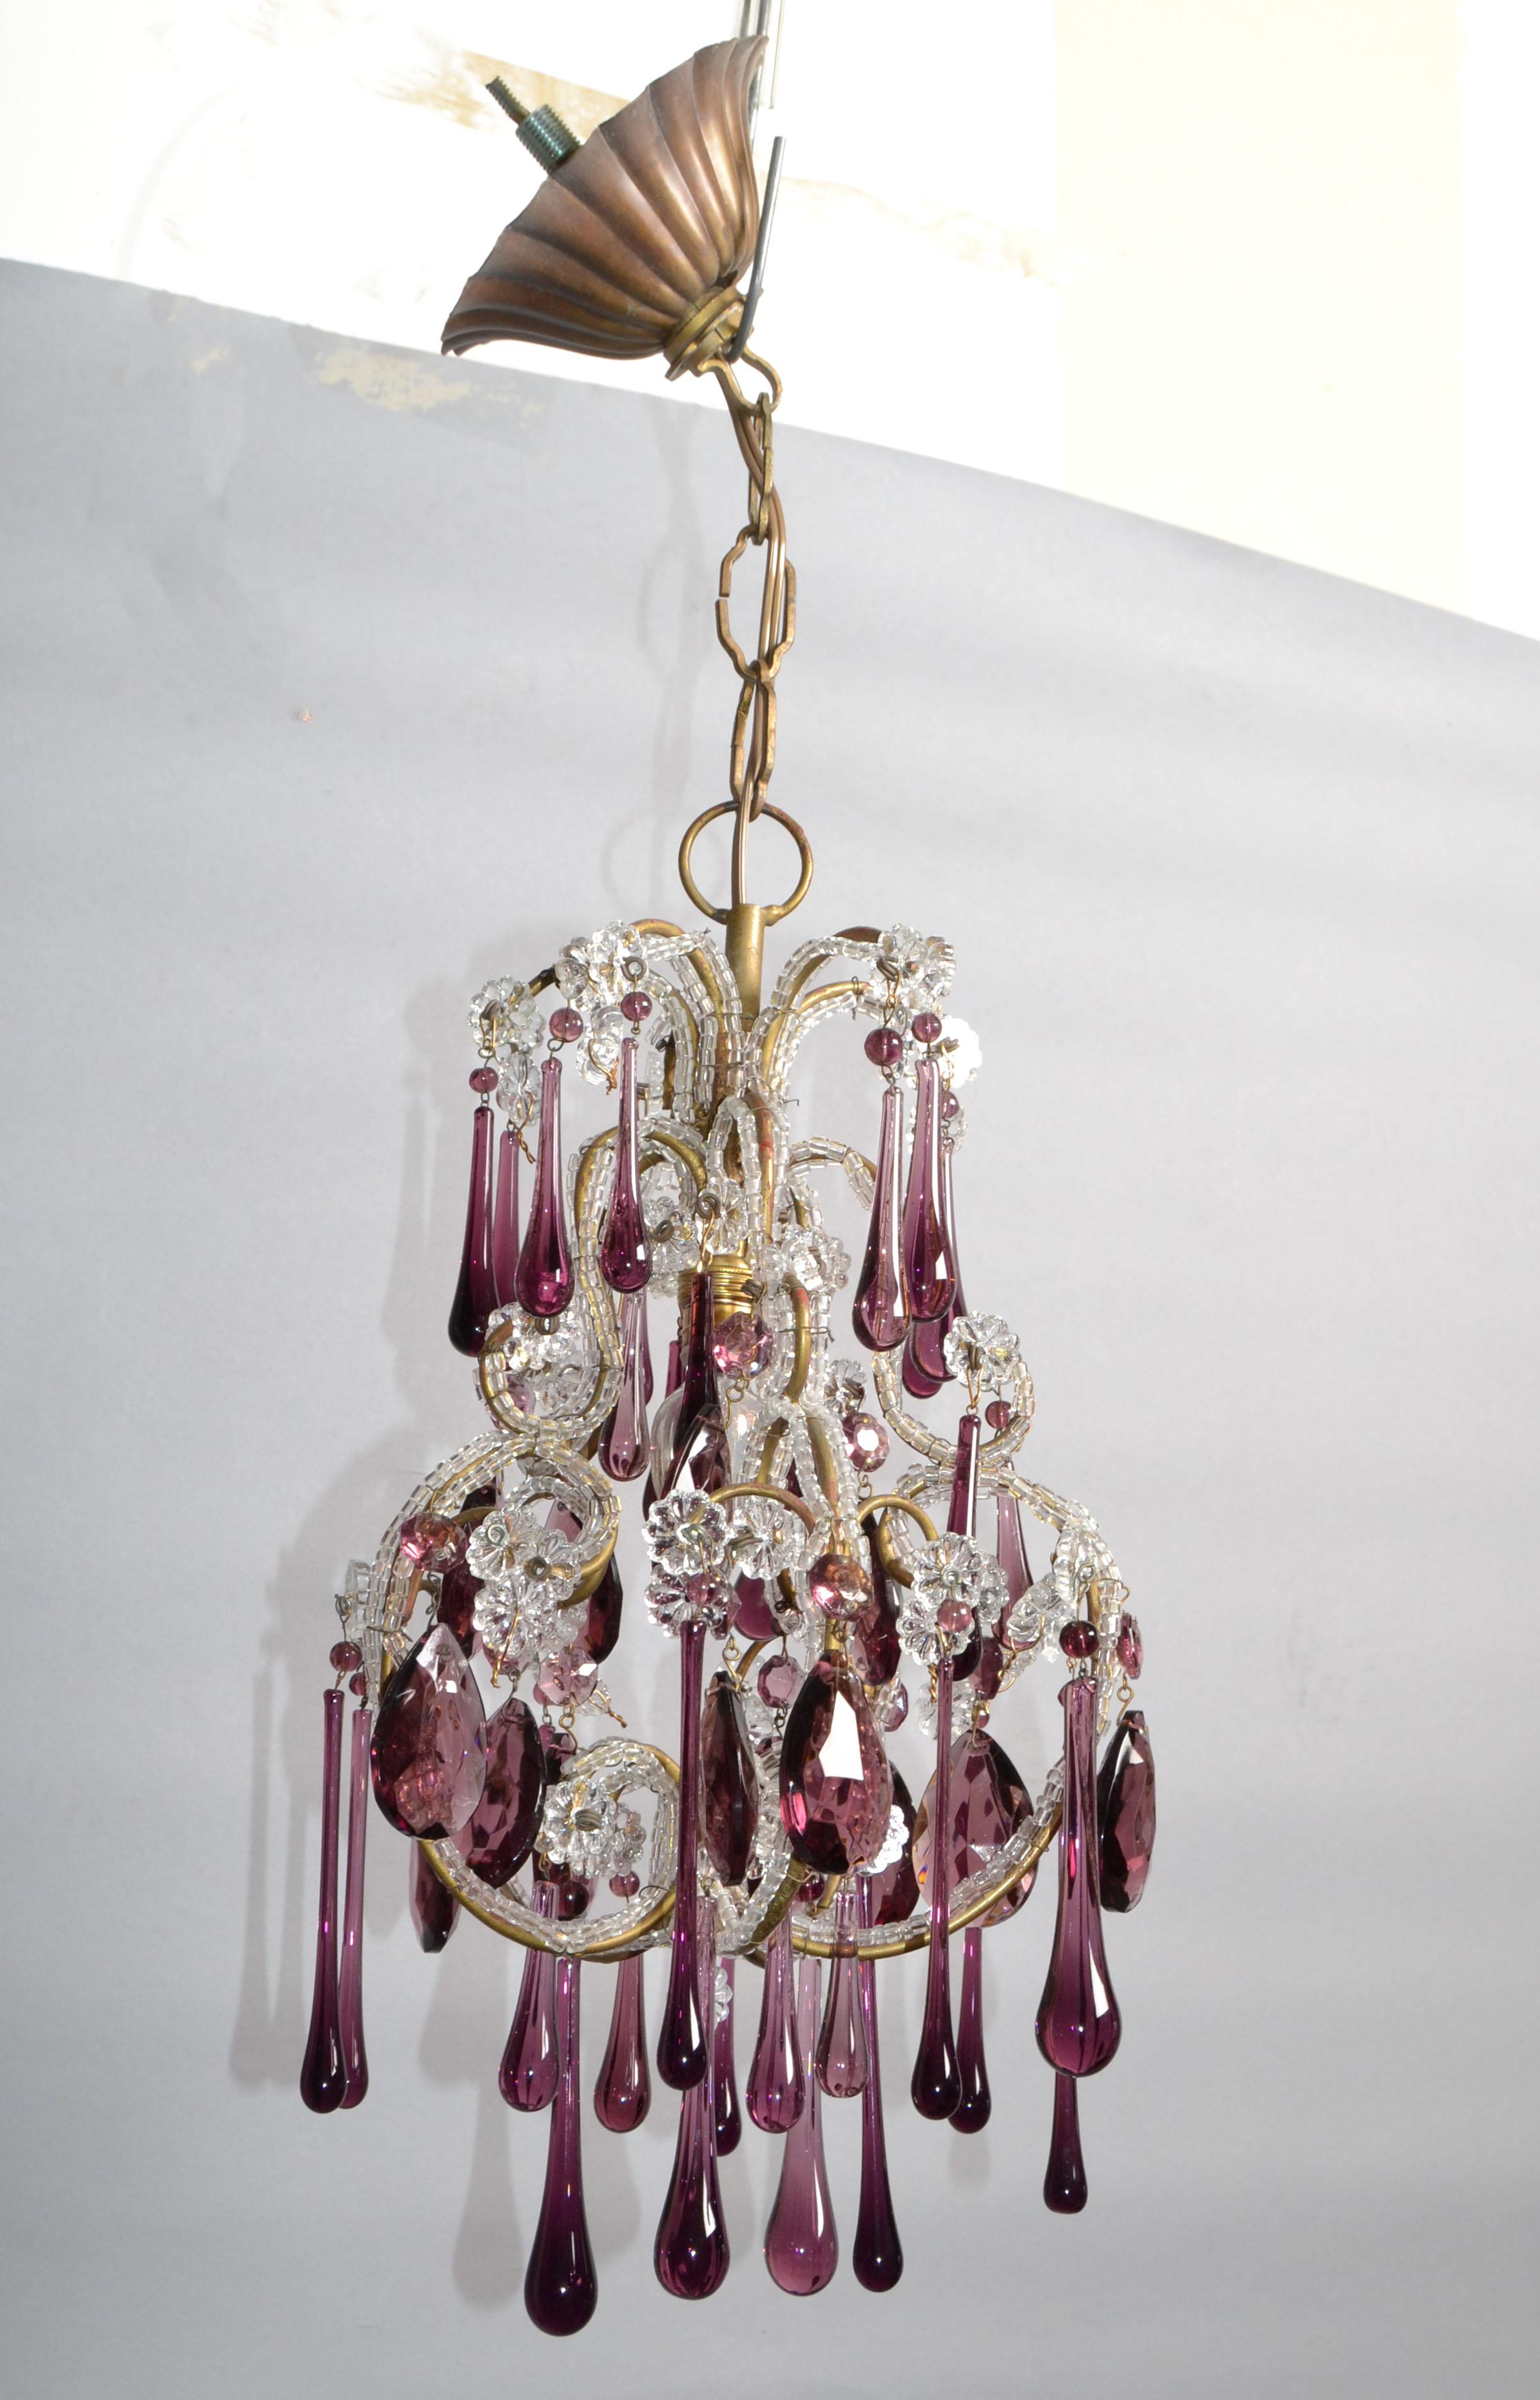 1930's French Petite chandelier 1 light, brass arms crystals beading and with bulbous Purple blown glass drops with clear glass flowers & beads to match above.
US rewiring and takes one candelabra light bulb with max. 60watts.
Comes with original